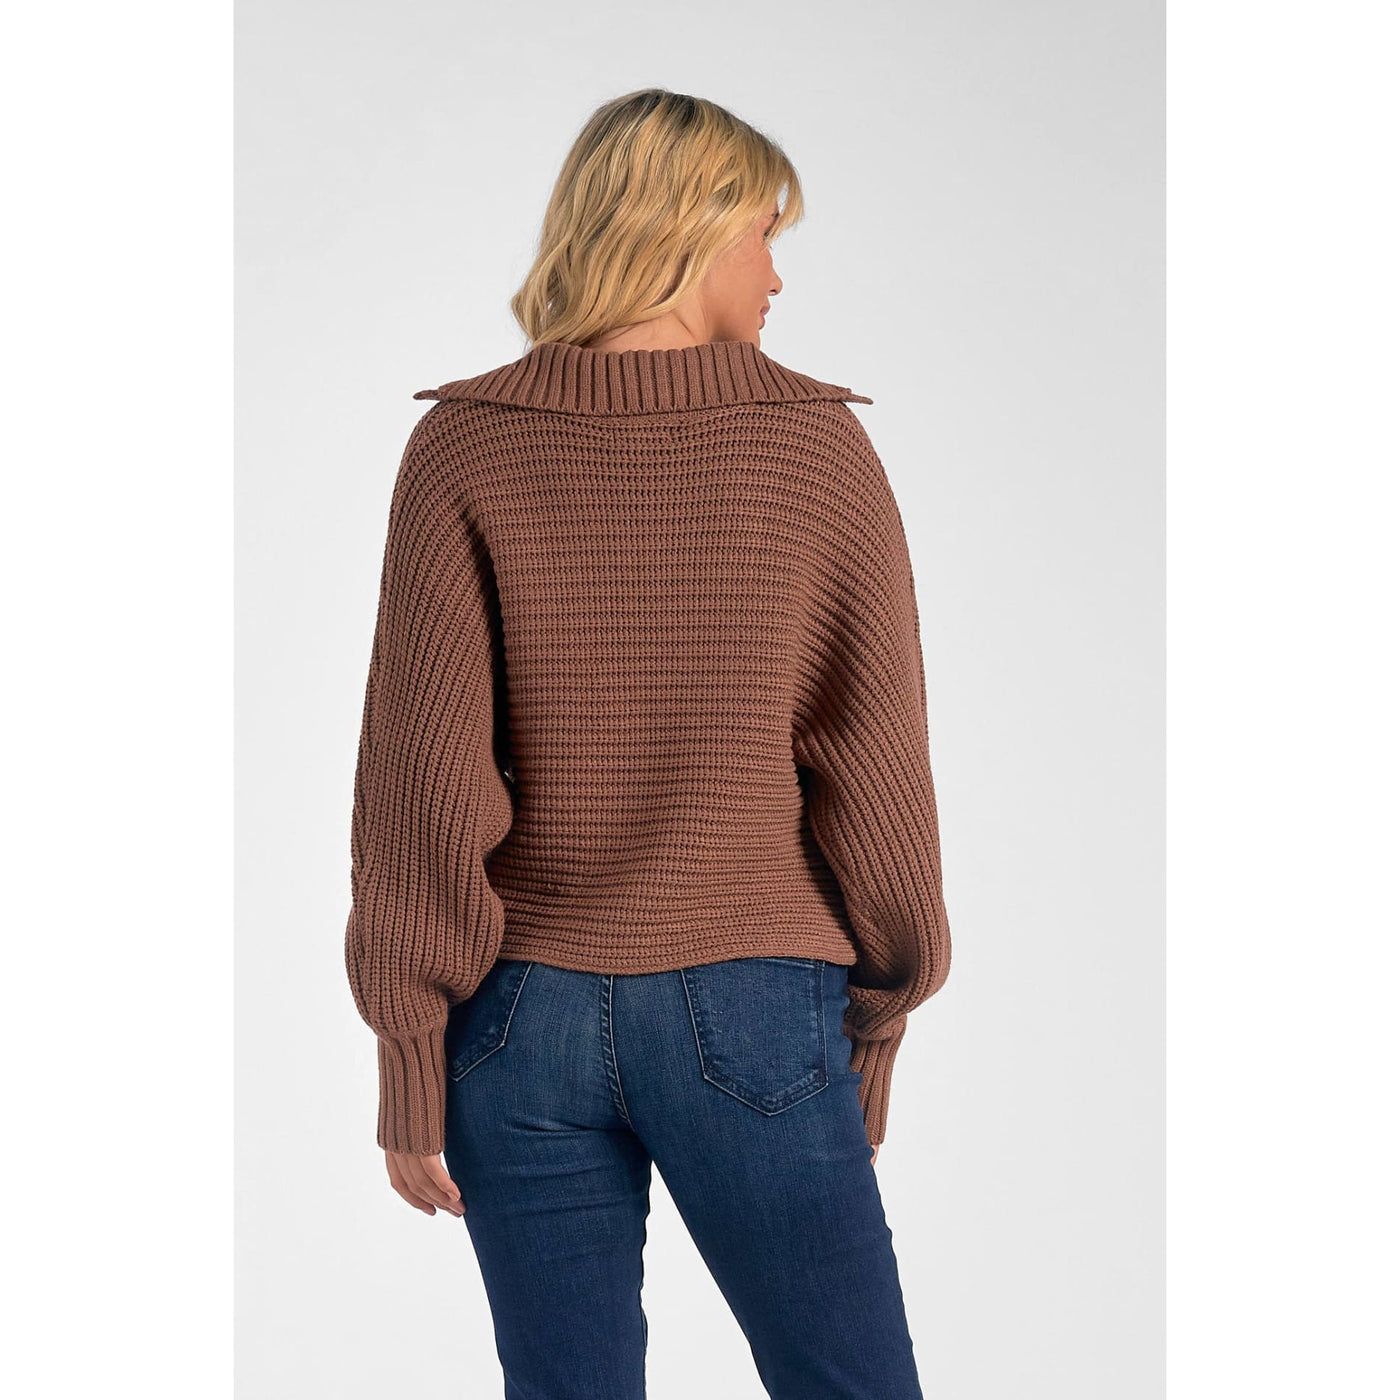 Love Me A Good Time Sweater - 130 Sweaters/Cardigans